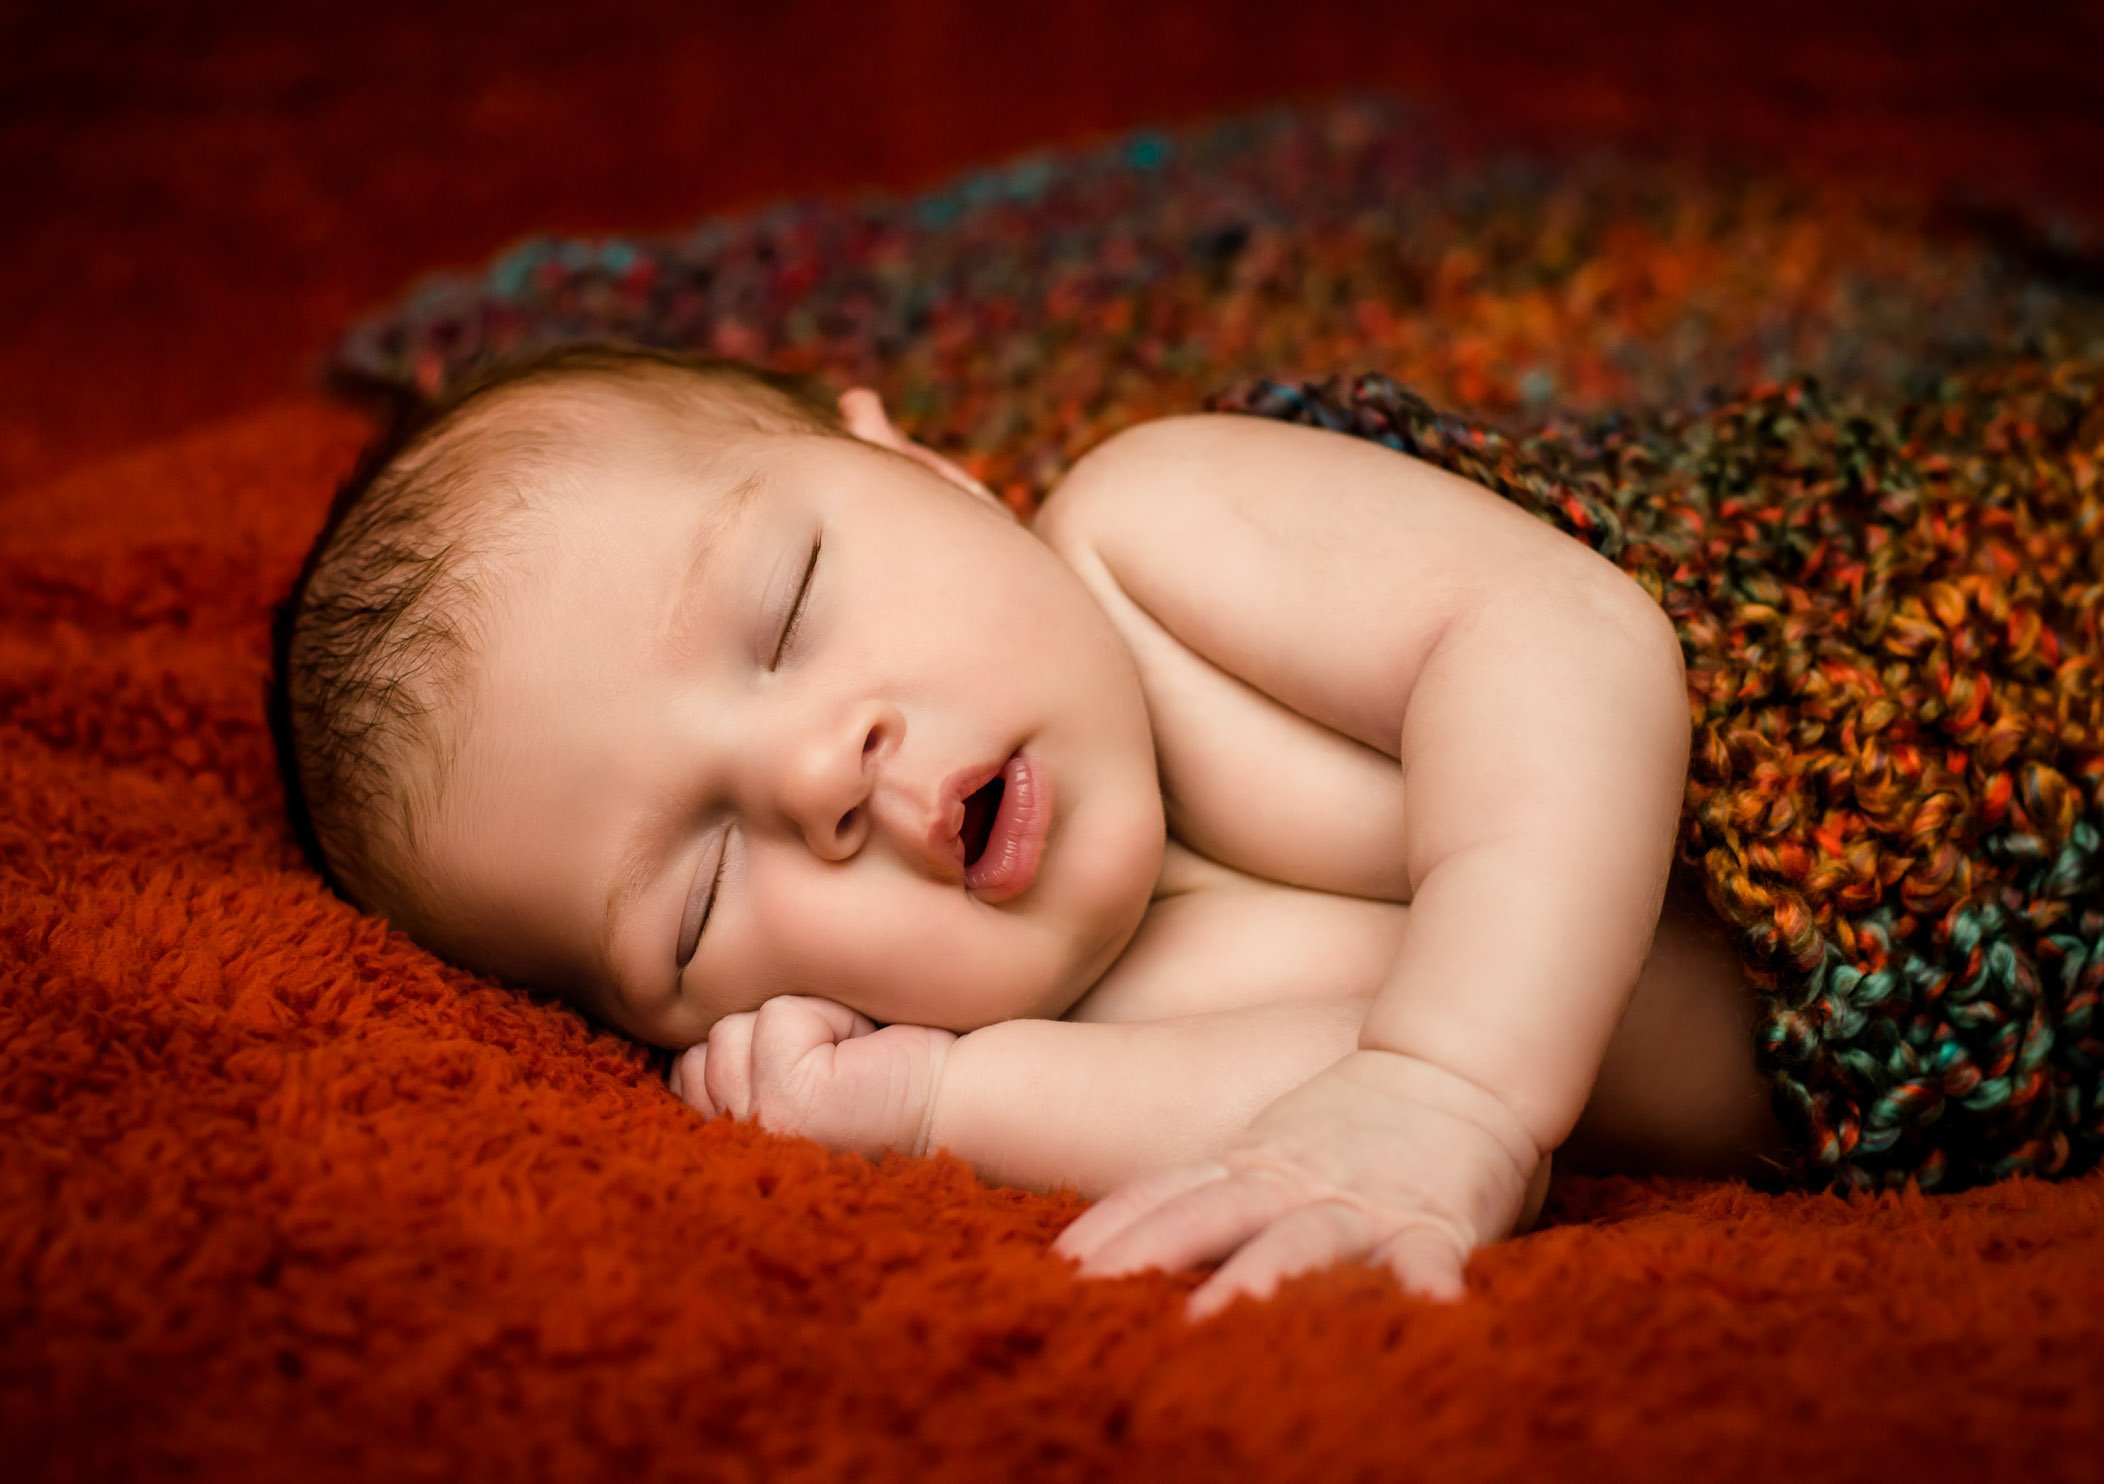 newborn sleeping on her side with her mouth open looking peaceful